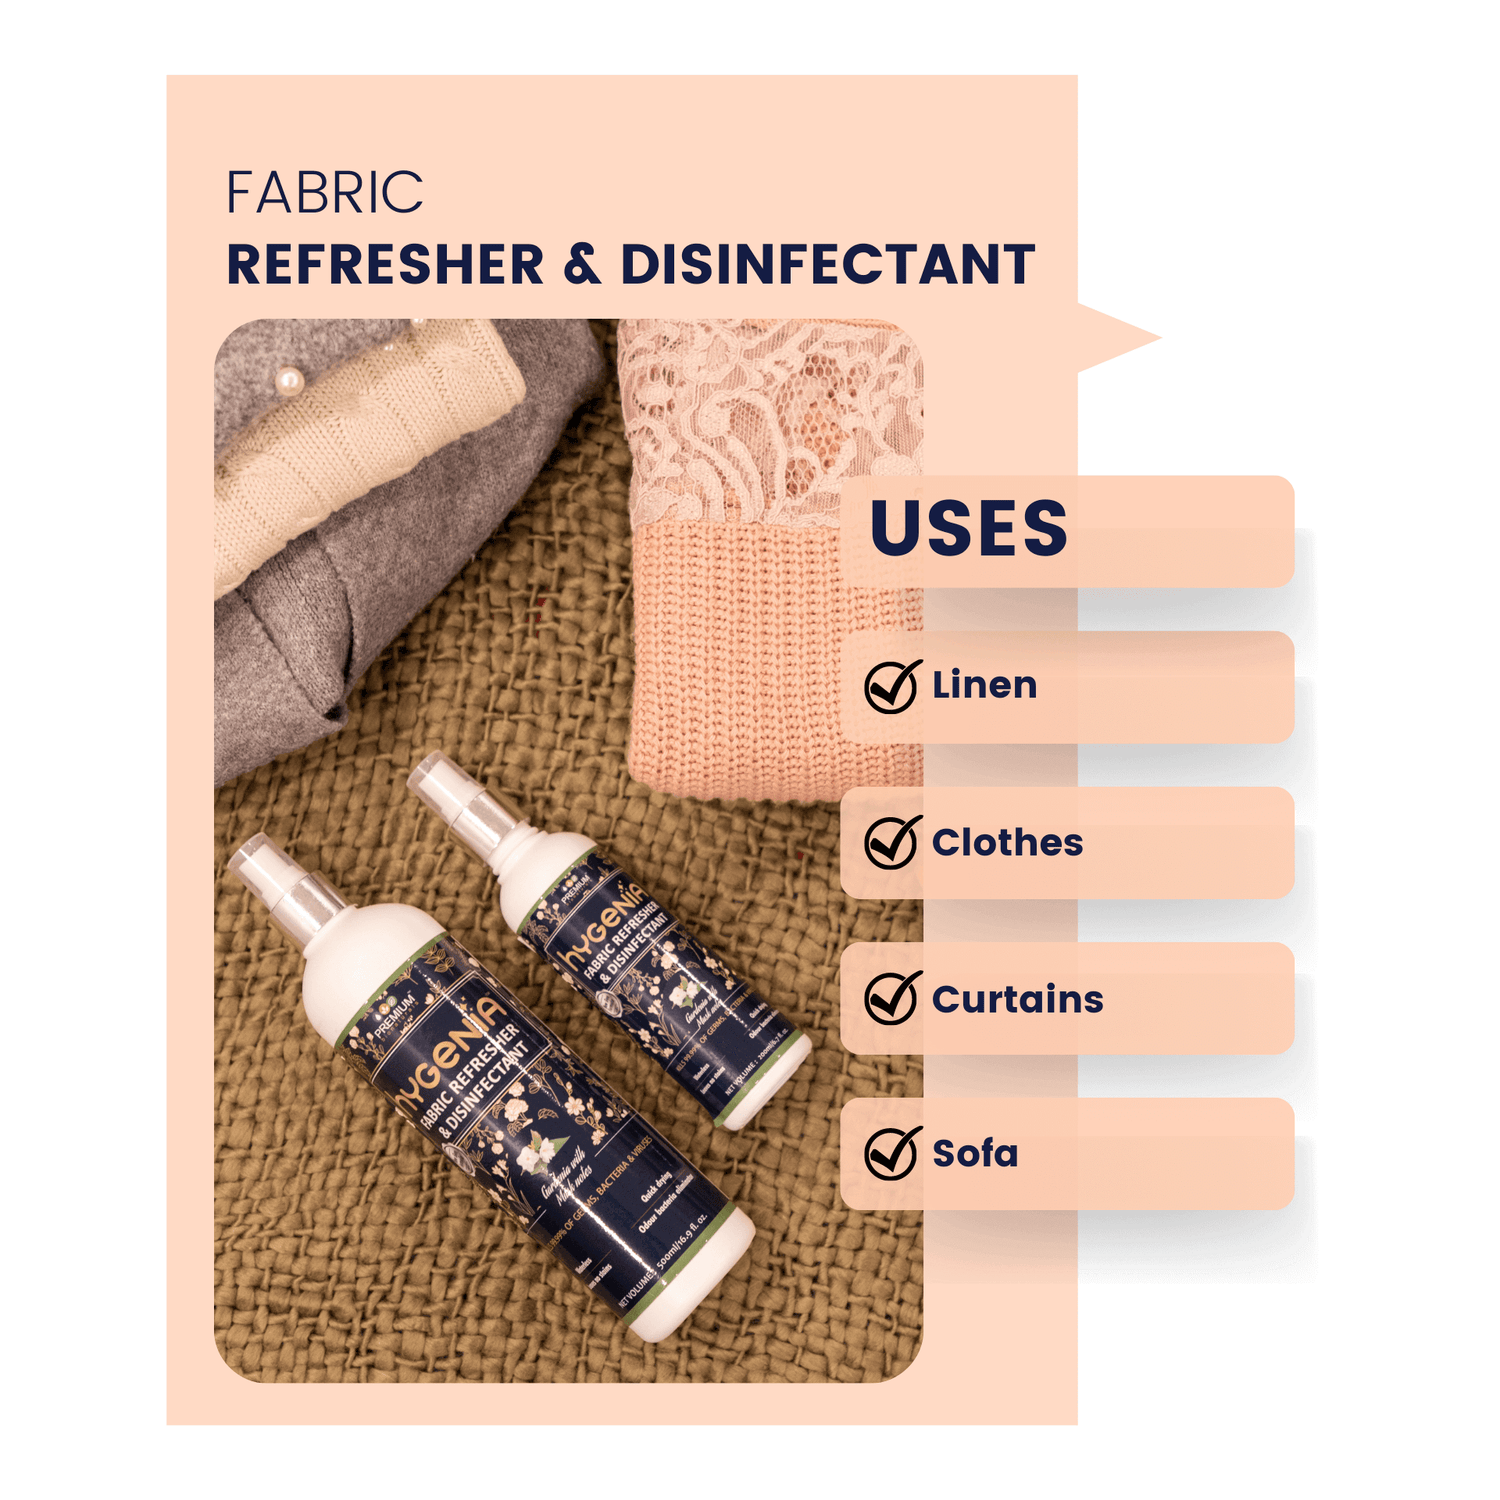 Refresh fabrics instantly with our fabric refresher that can be used on linen, clothes, curtains and sofas.